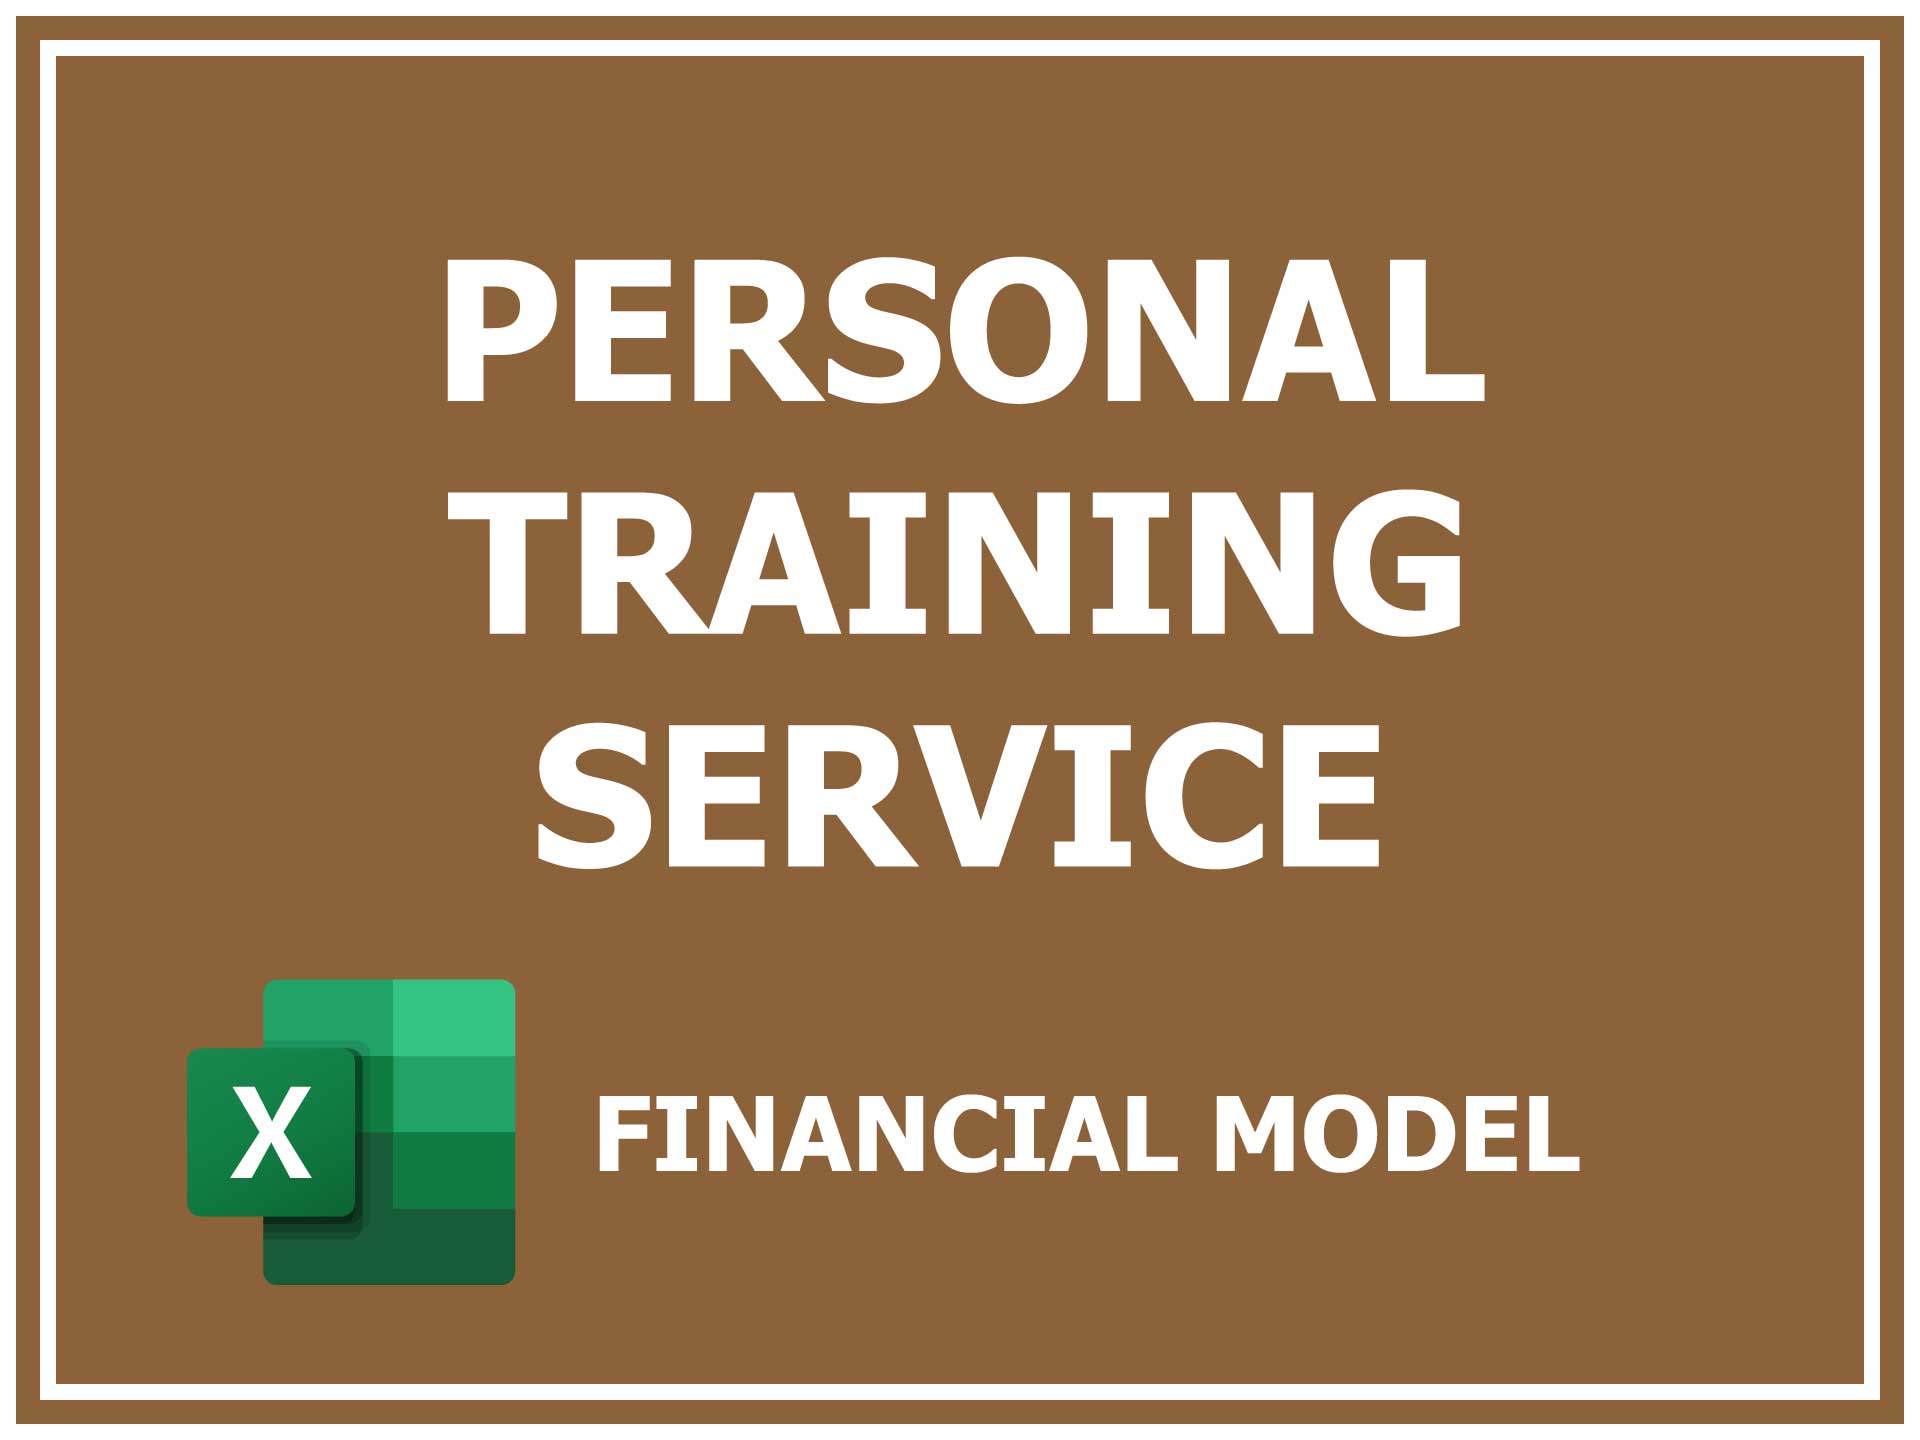 Personal Training Service